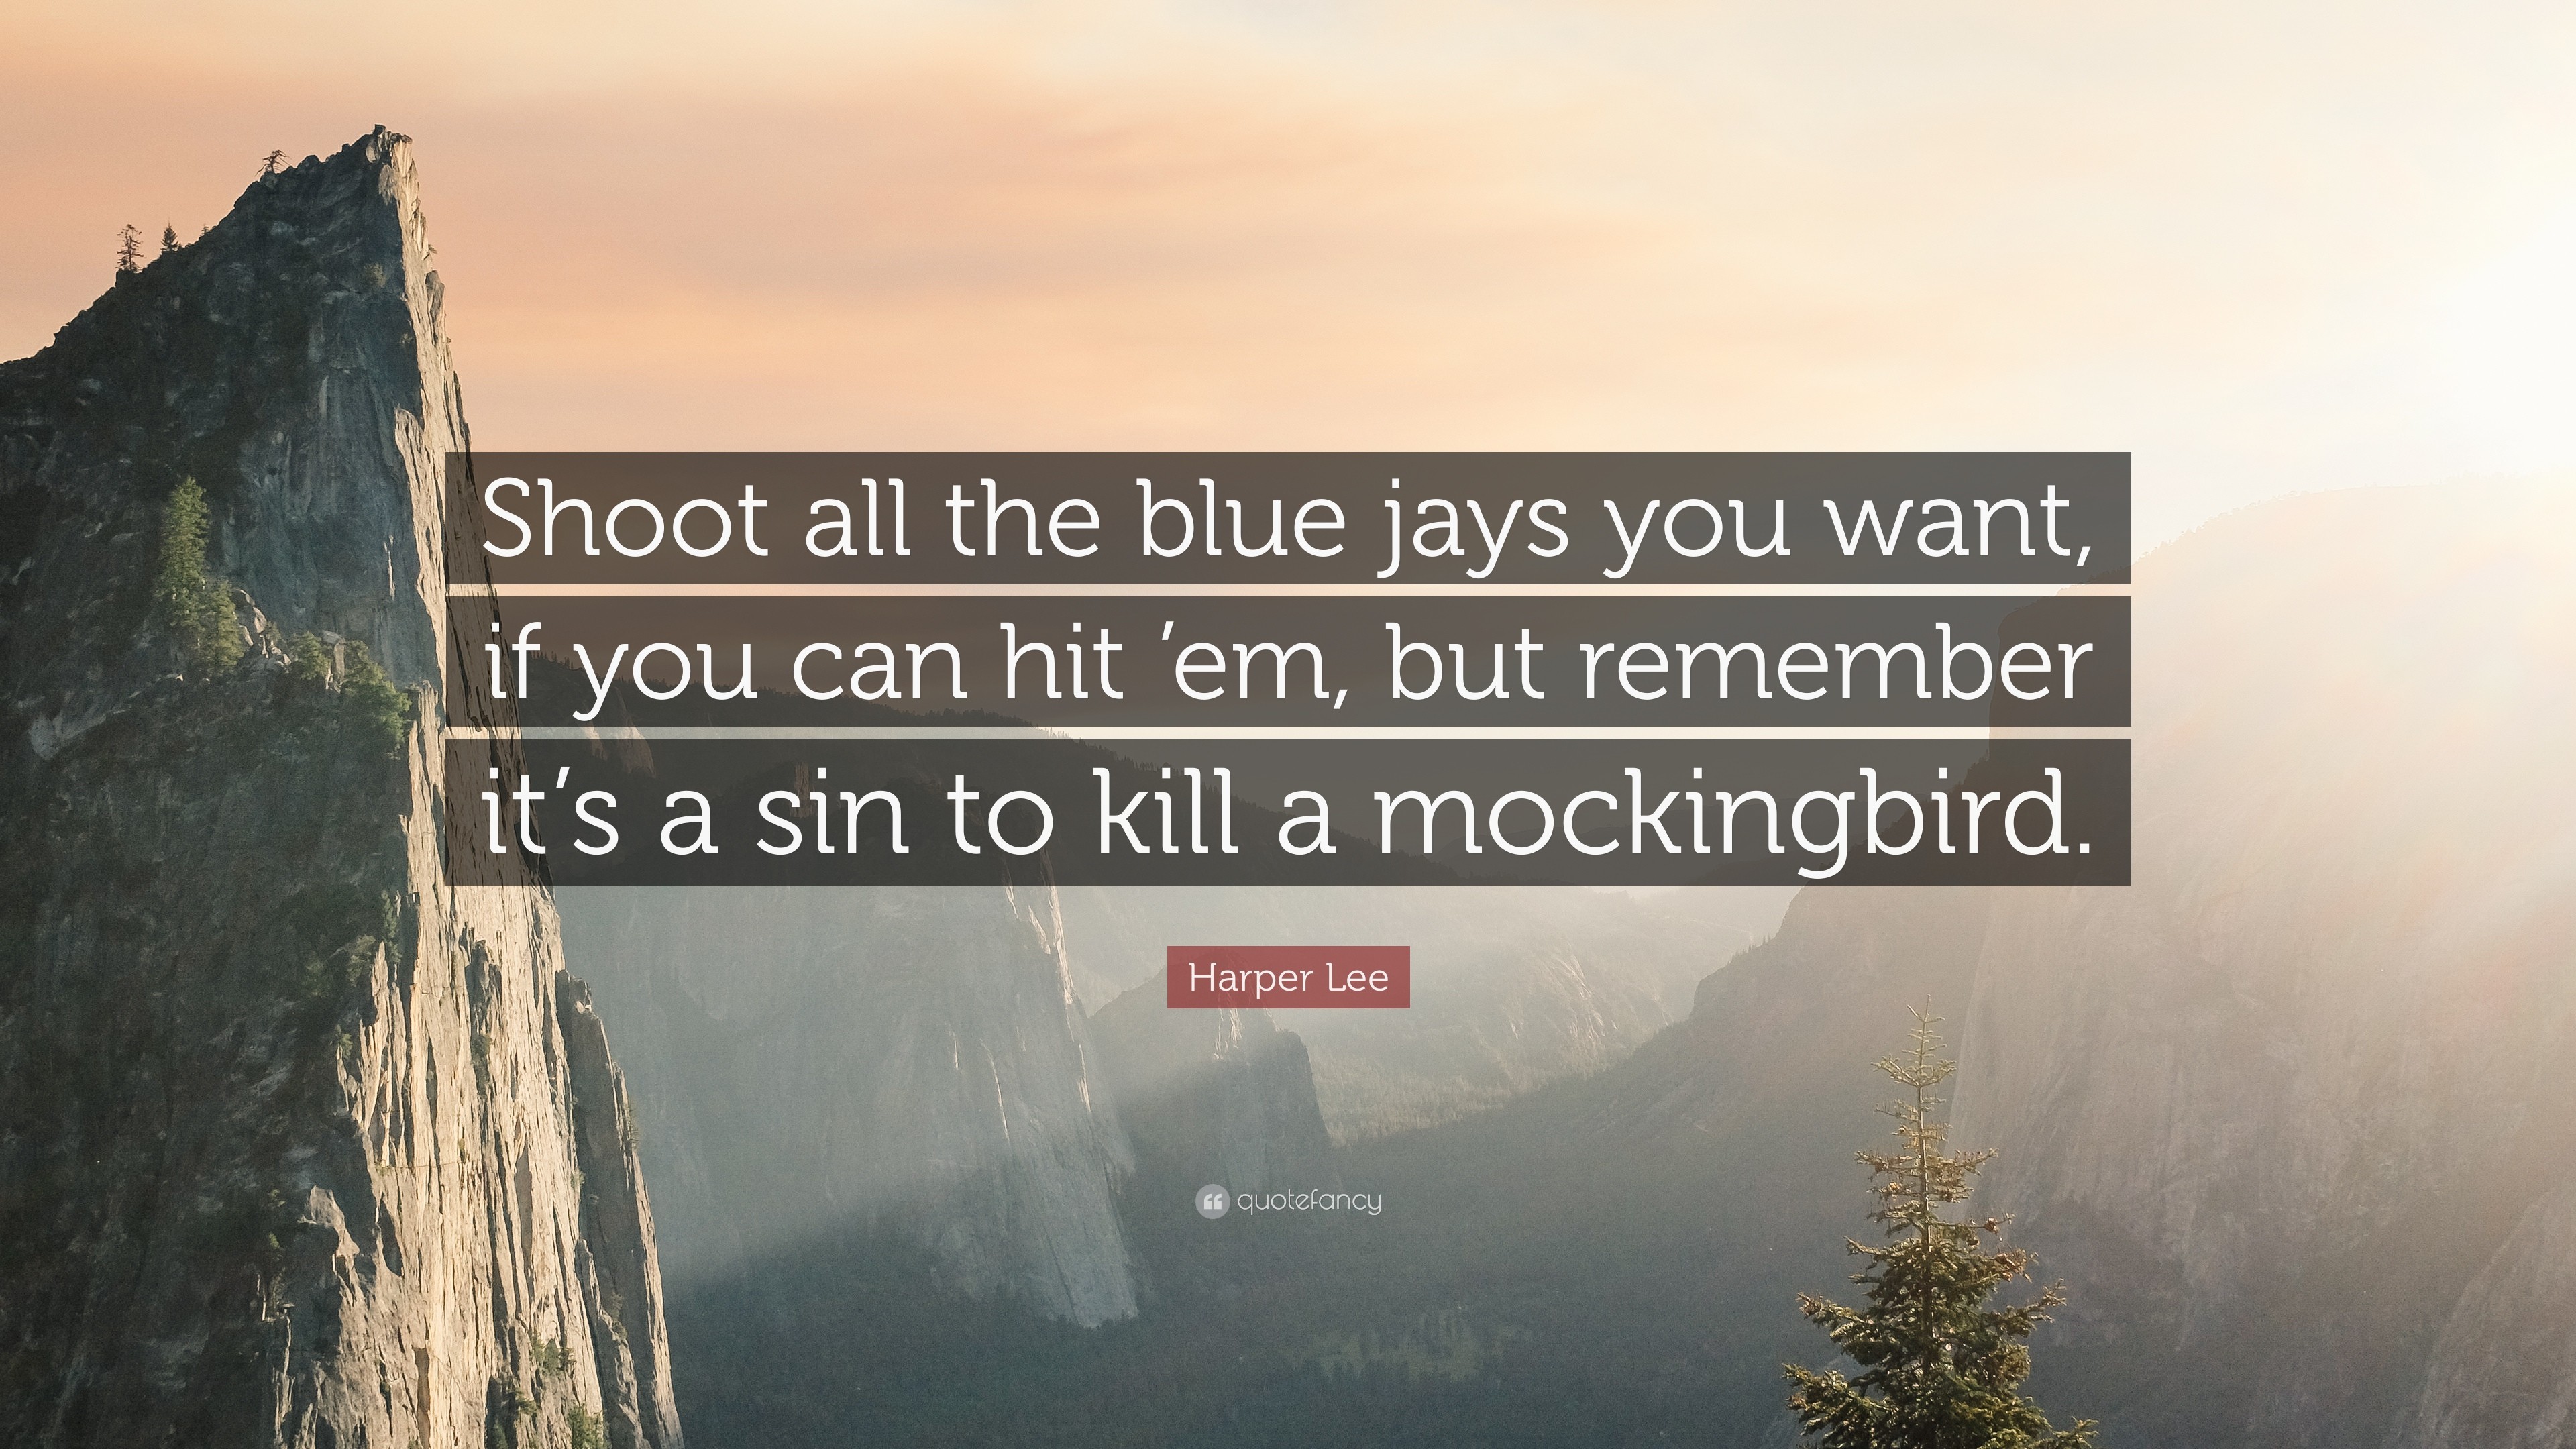 3840x2160 Harper Lee Quote: “Shoot all the blue jays you want, if you can